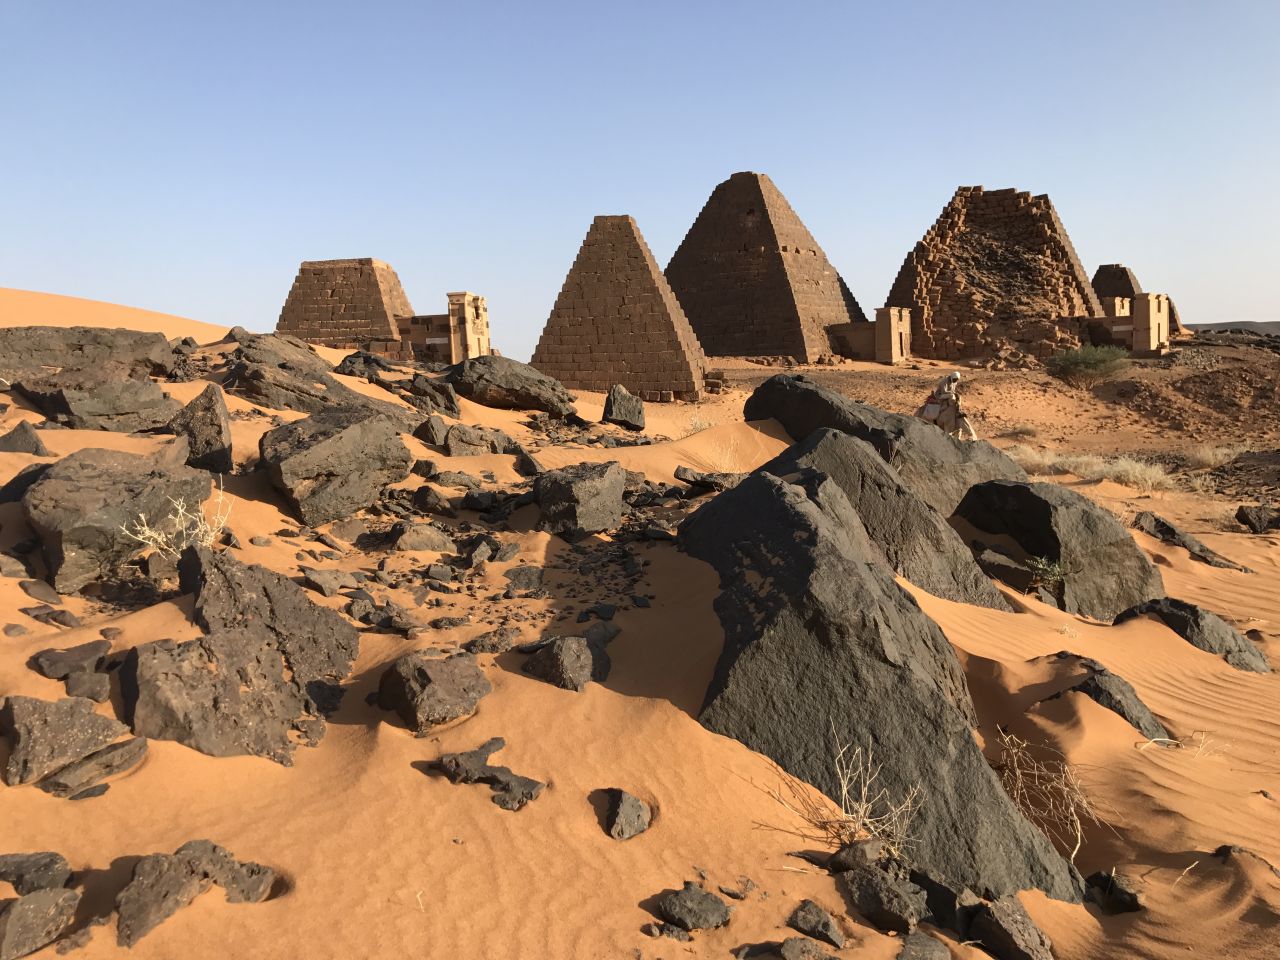 More than 200 pyramids are believe to be located in Sudan. About 177 are located in the Island of Meroe, while the other 74 are in the Nuri region. 